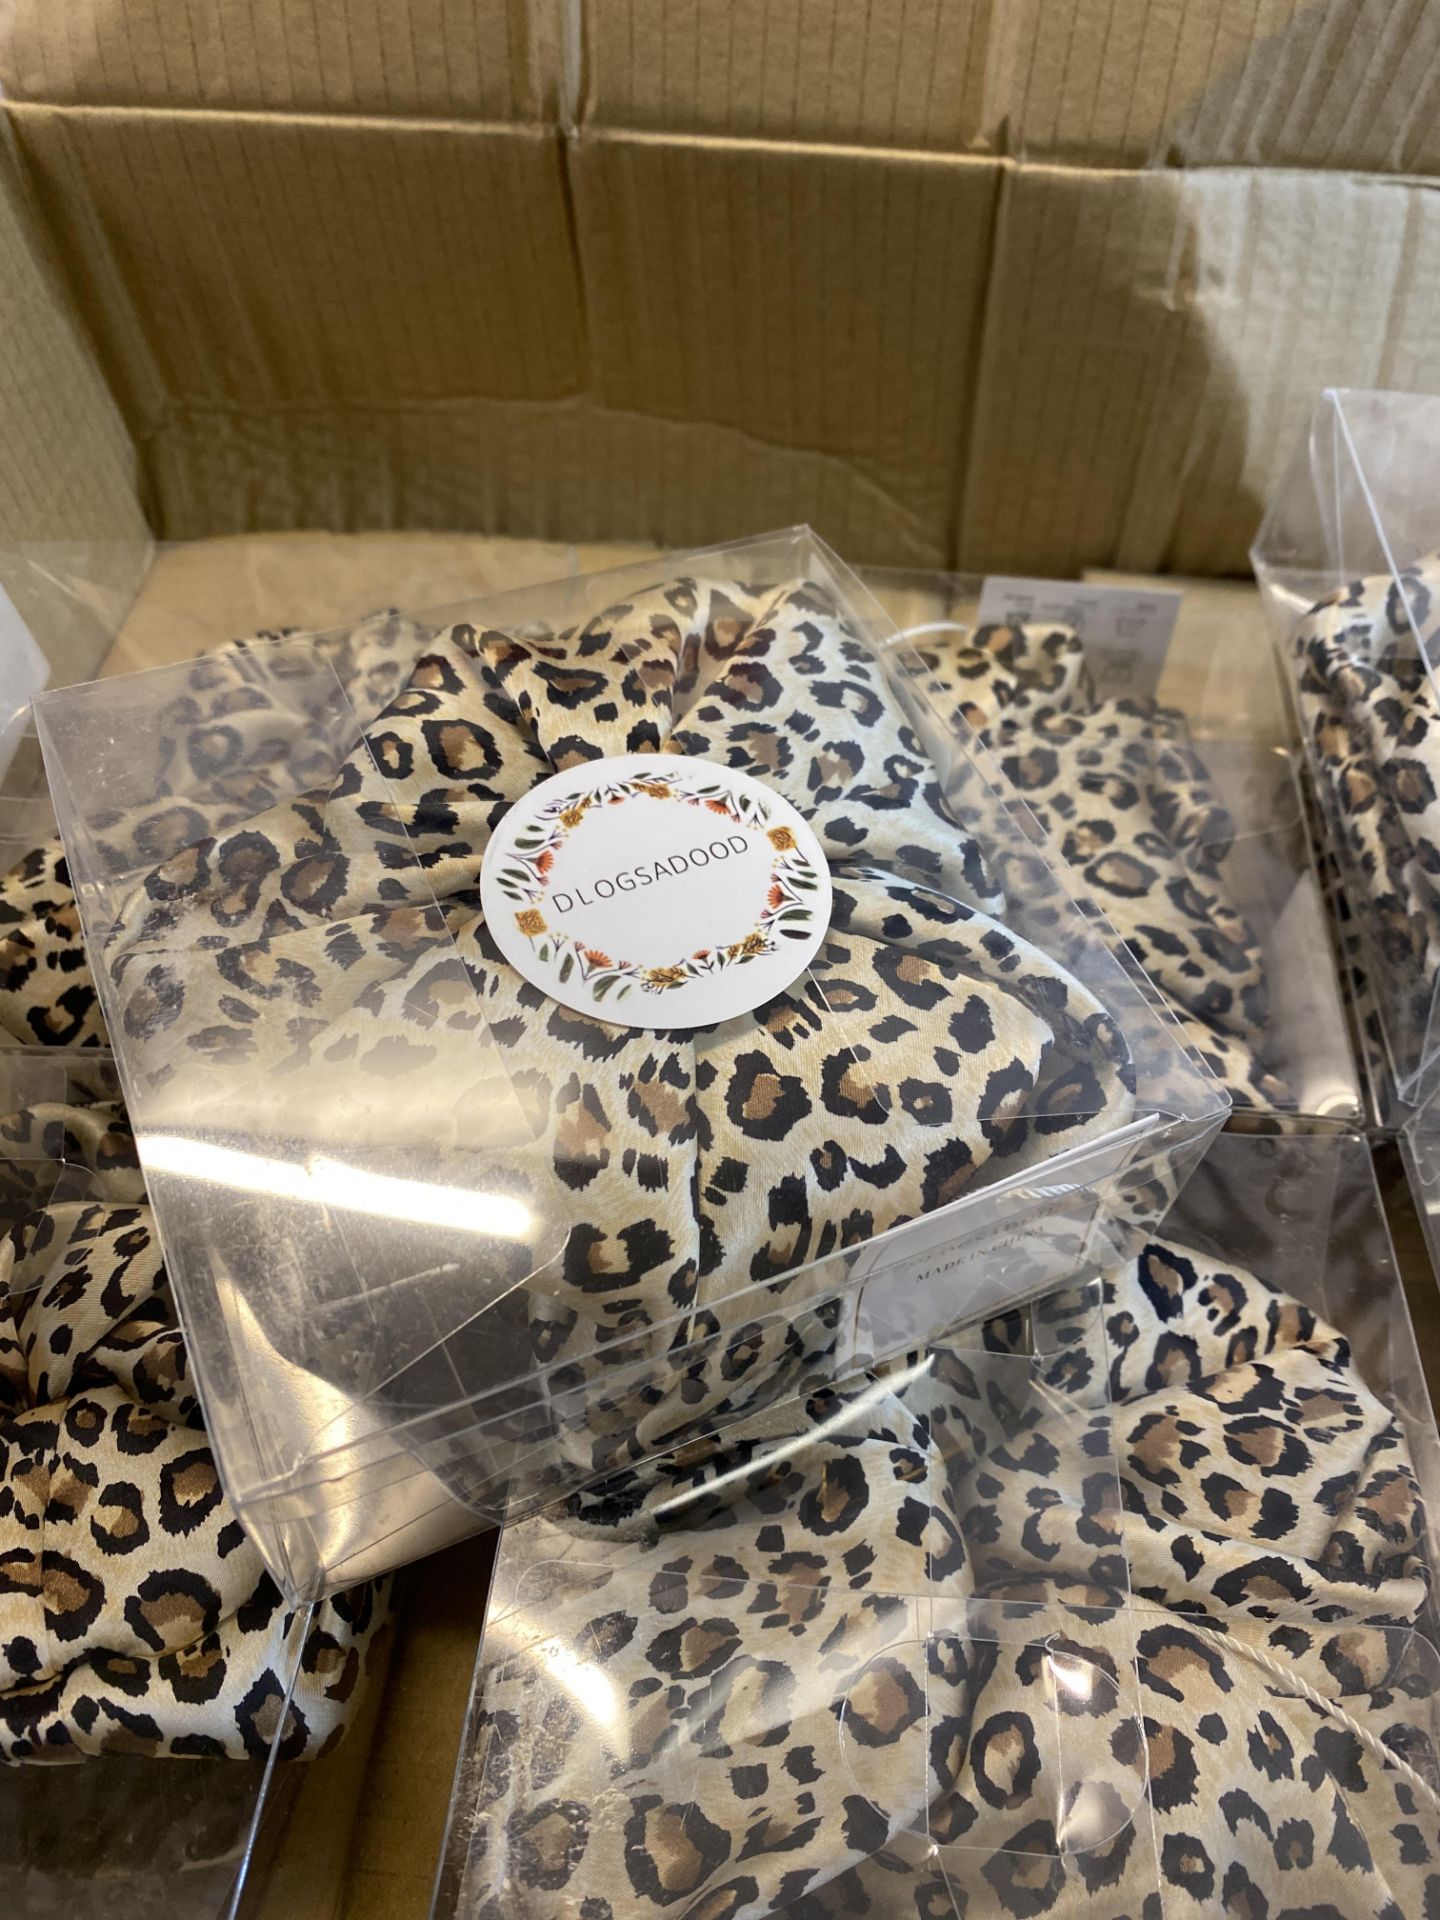 RRP £19.99 Mulberry Silk Scrunchies For Hair in Leopard Print,100% Pure 22 Momme Mulberry Silk -Hair - Image 2 of 2